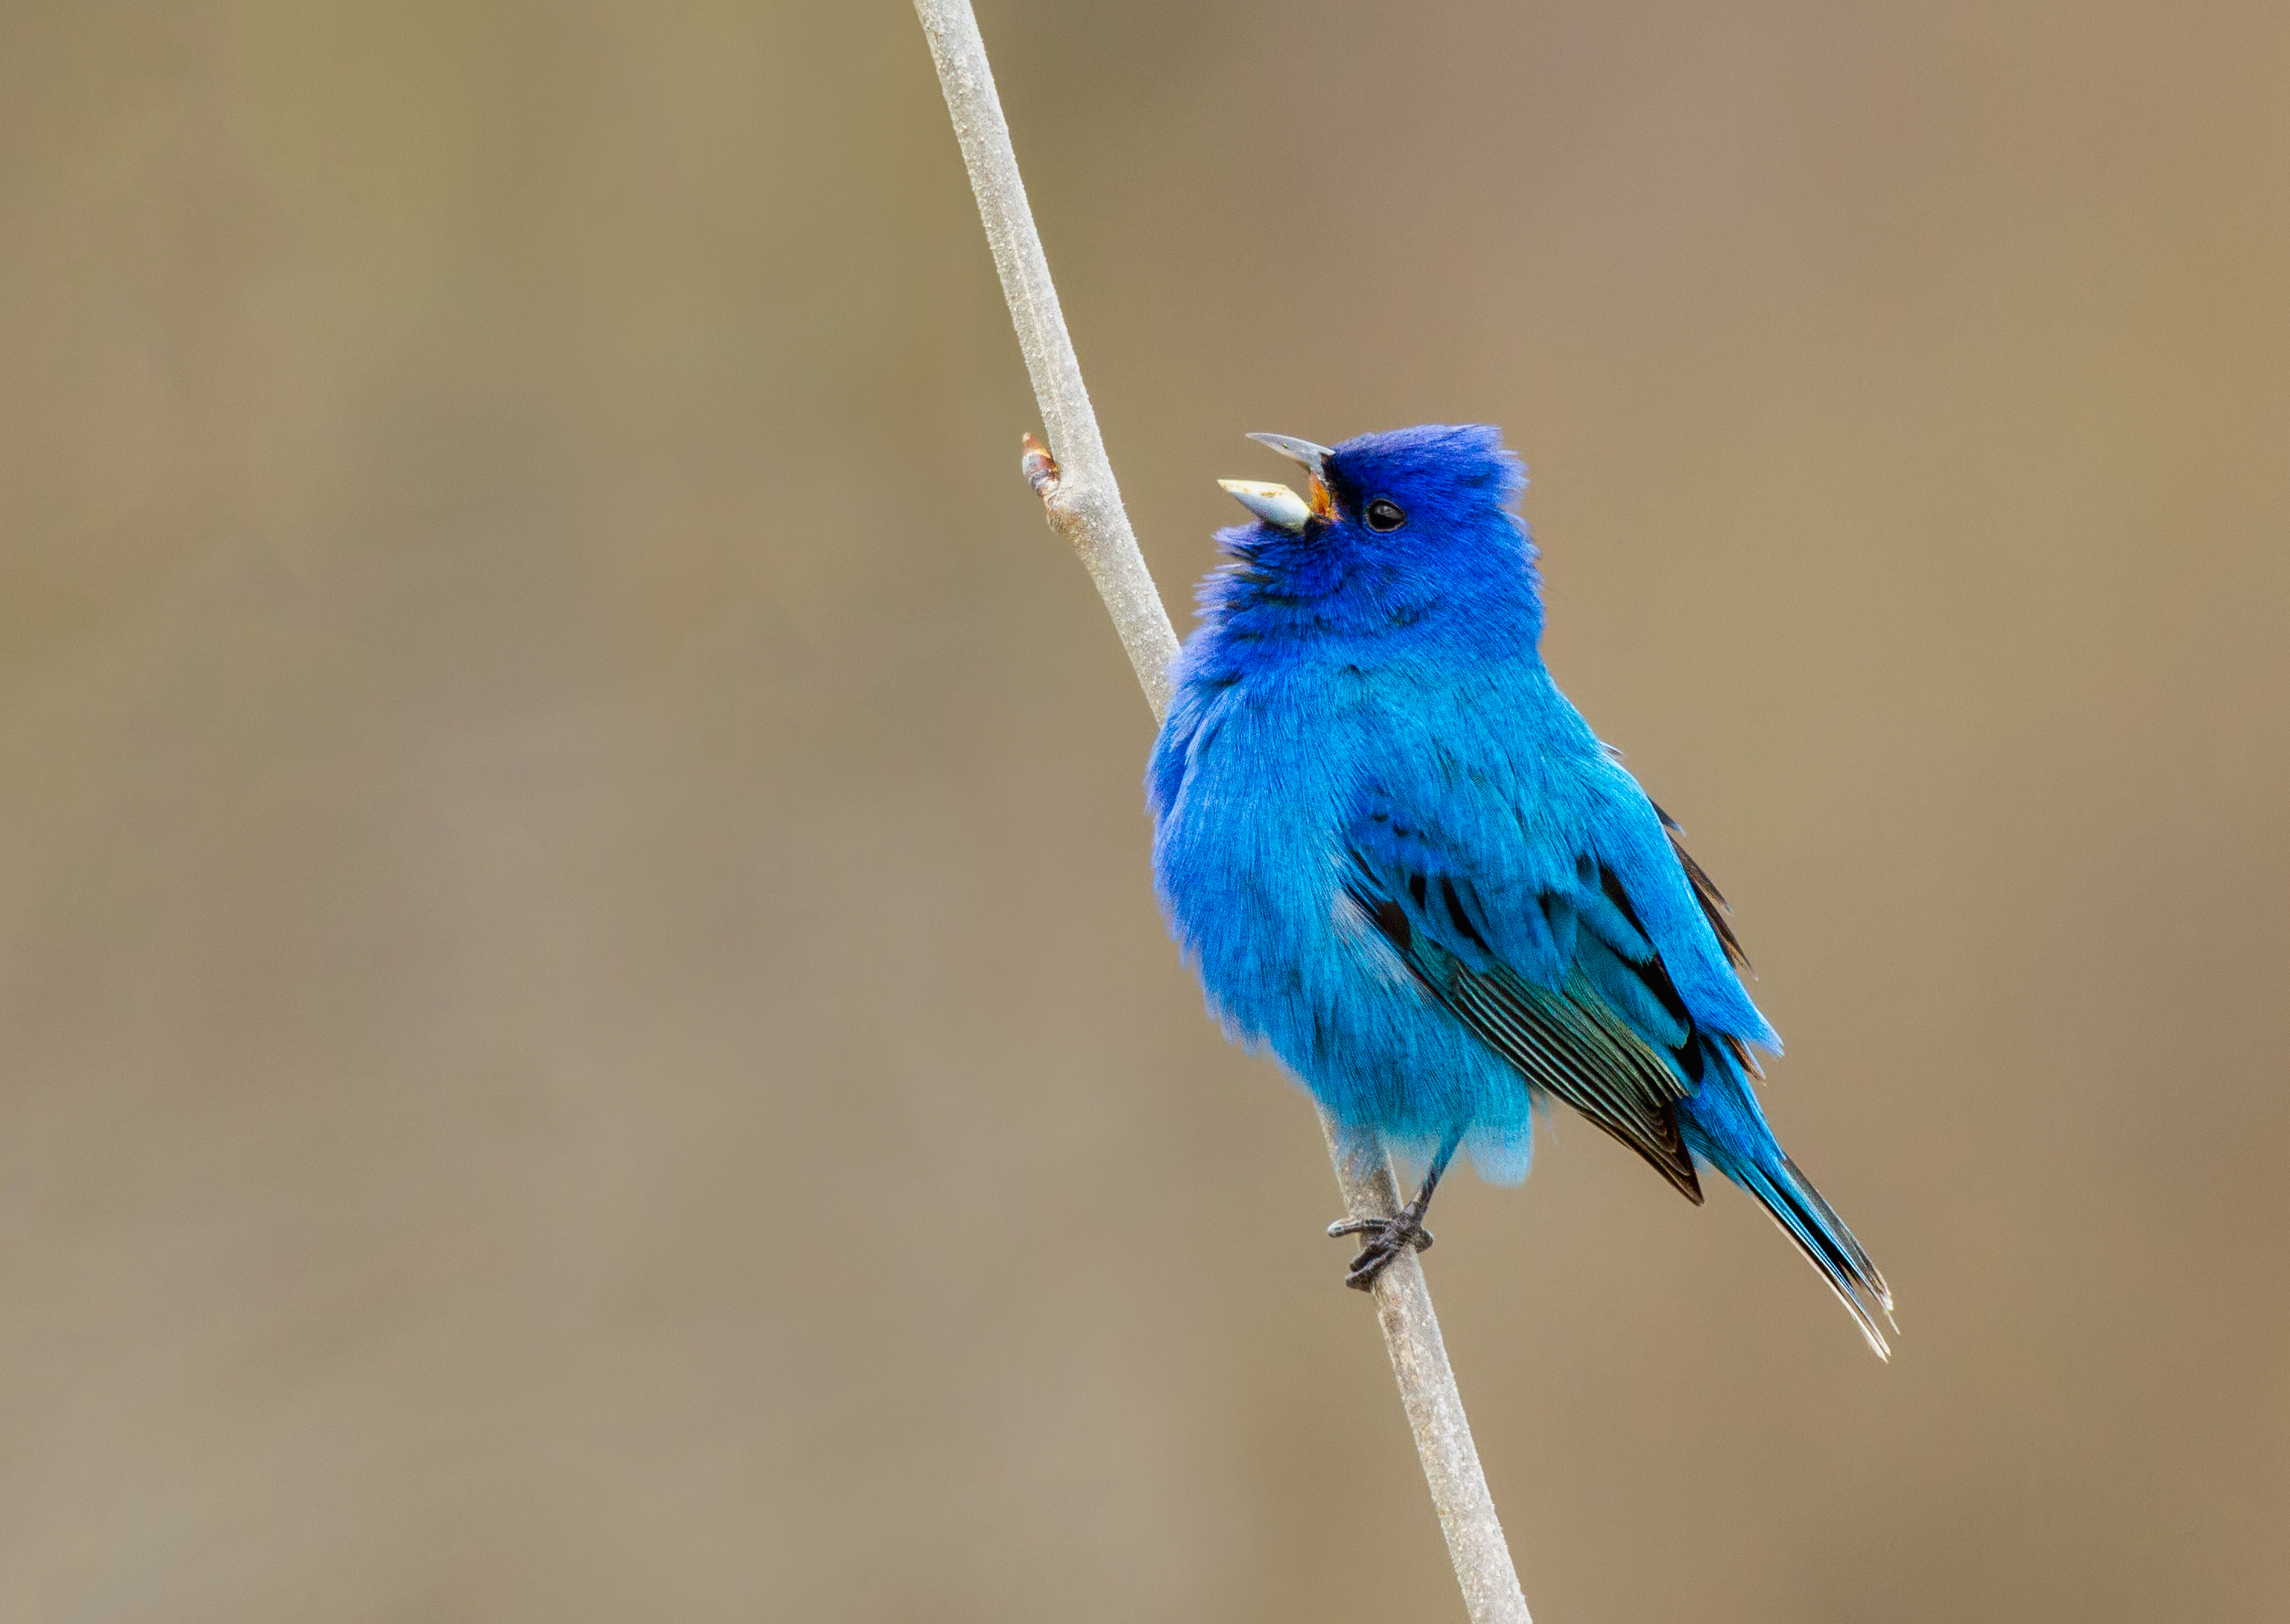 A bright blue bird with black feathers on it's wings calling from a small twig